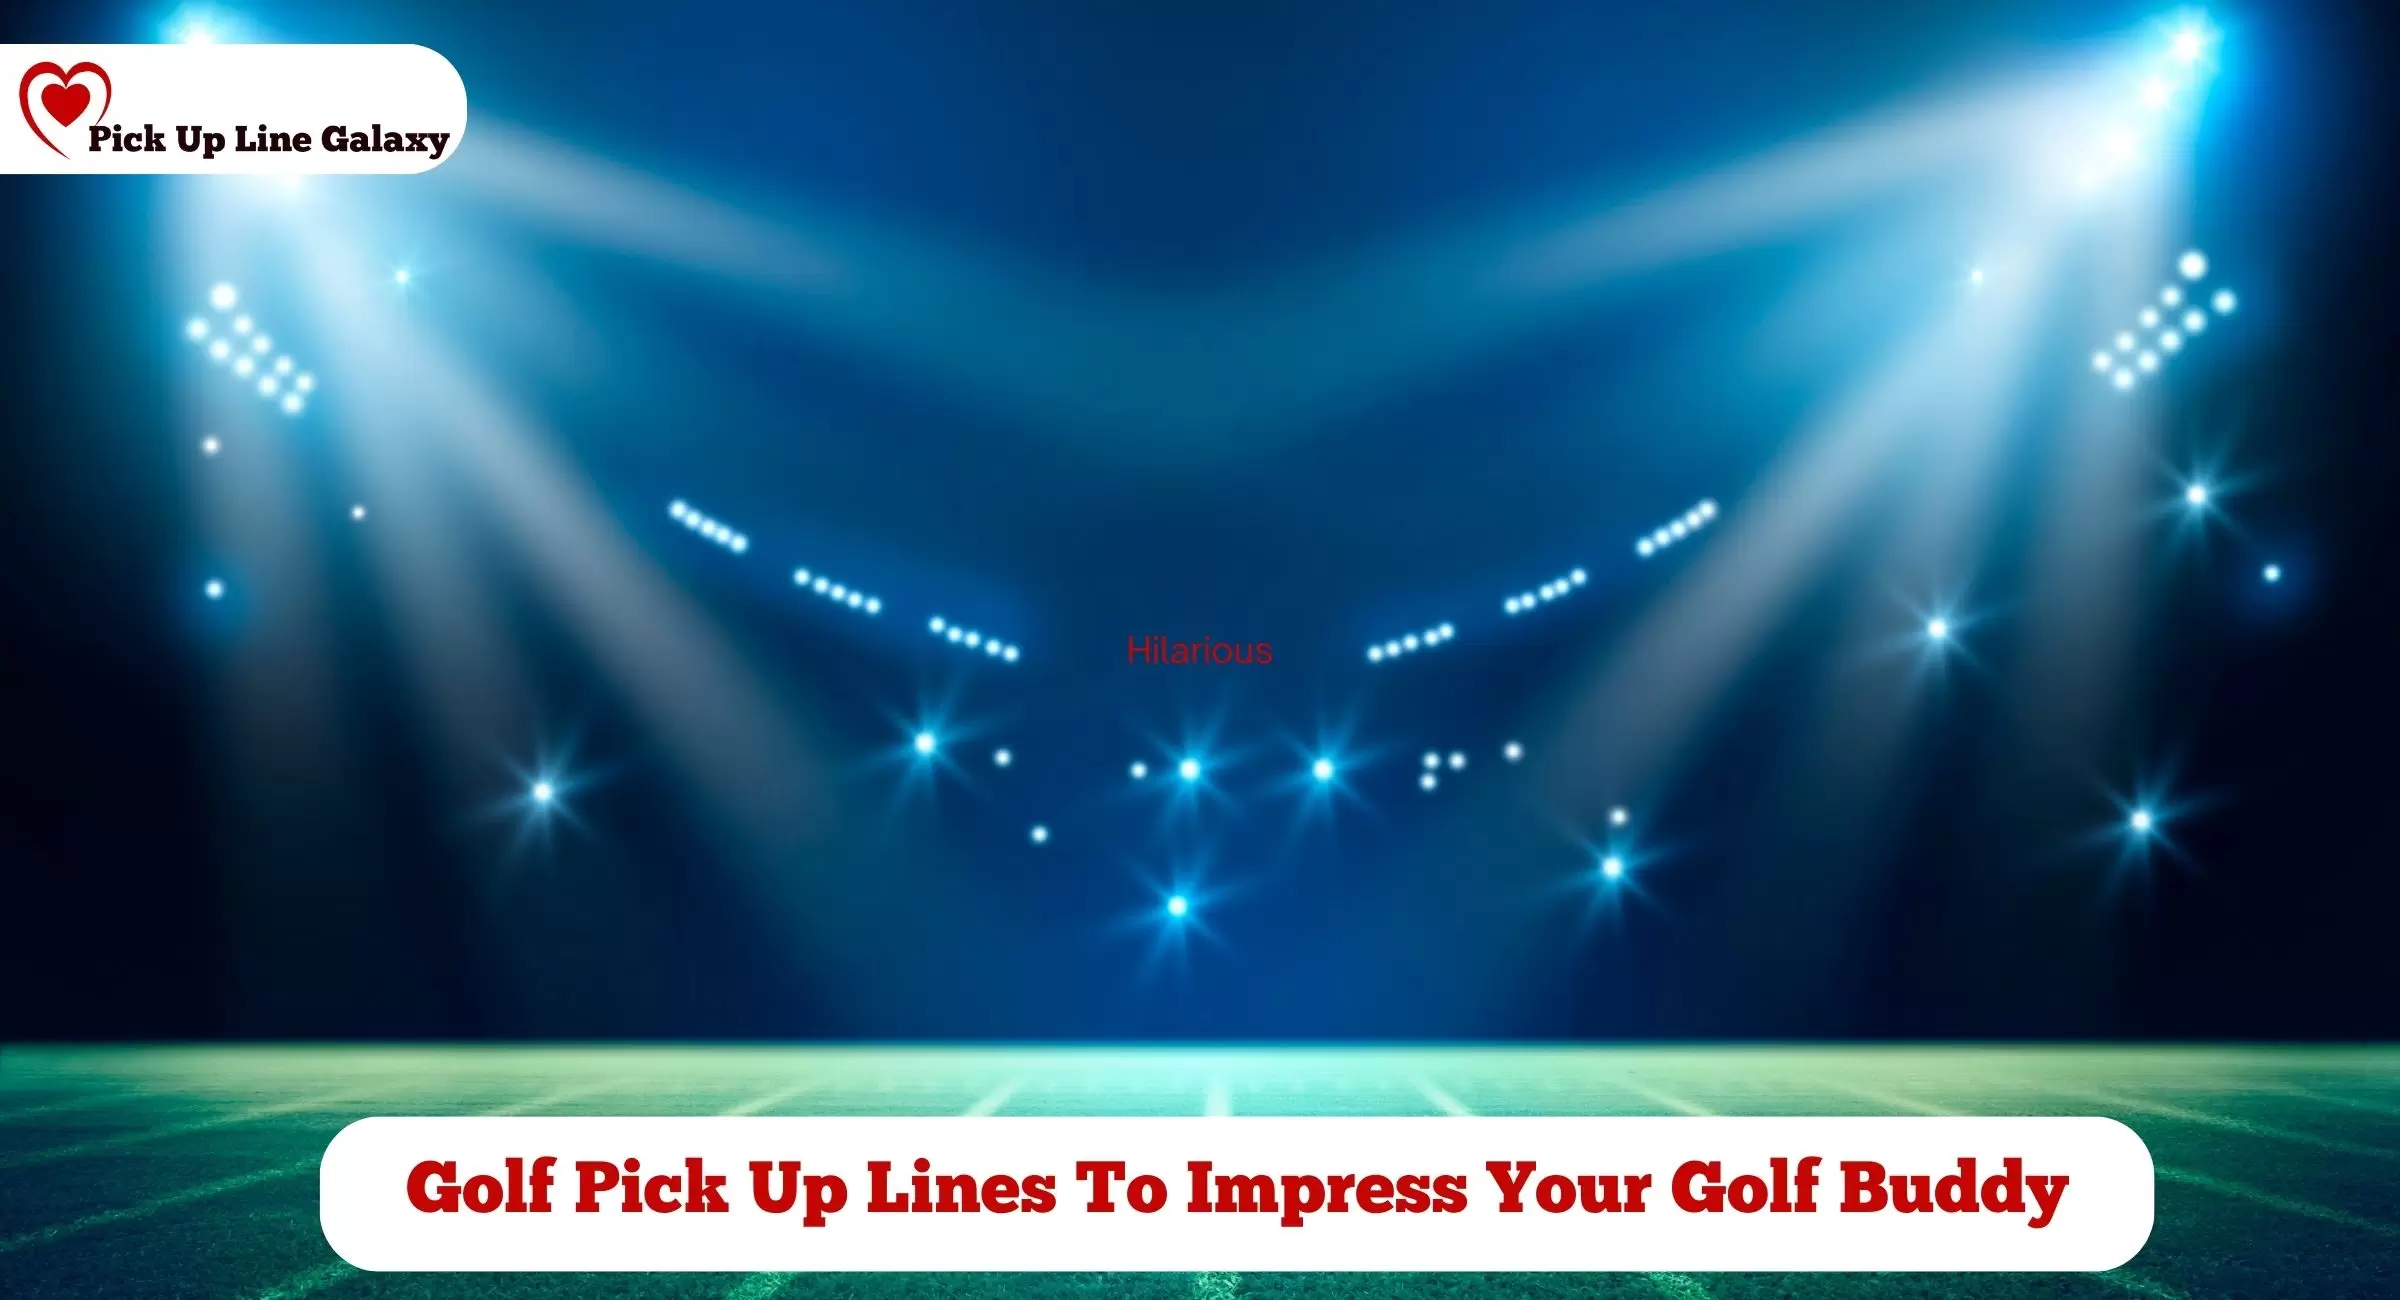 Golf Pick Up Lines To Impress Your Golf Buddy